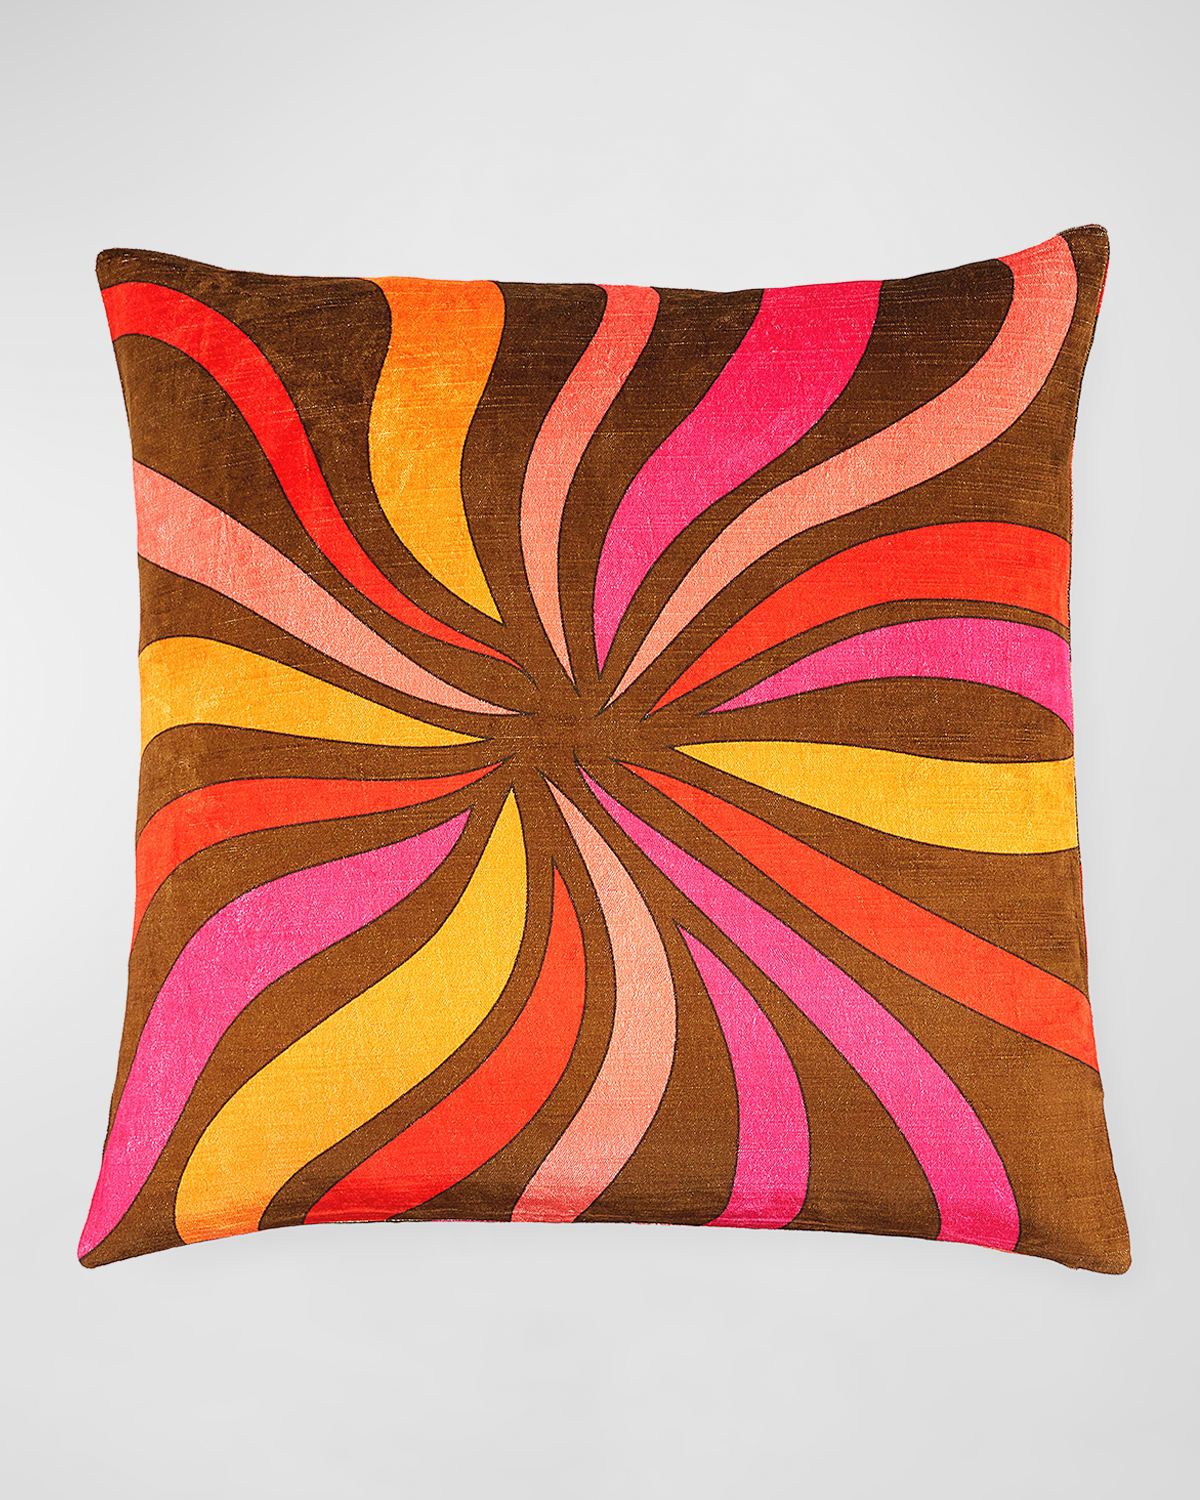 Madrid Flames Pillow